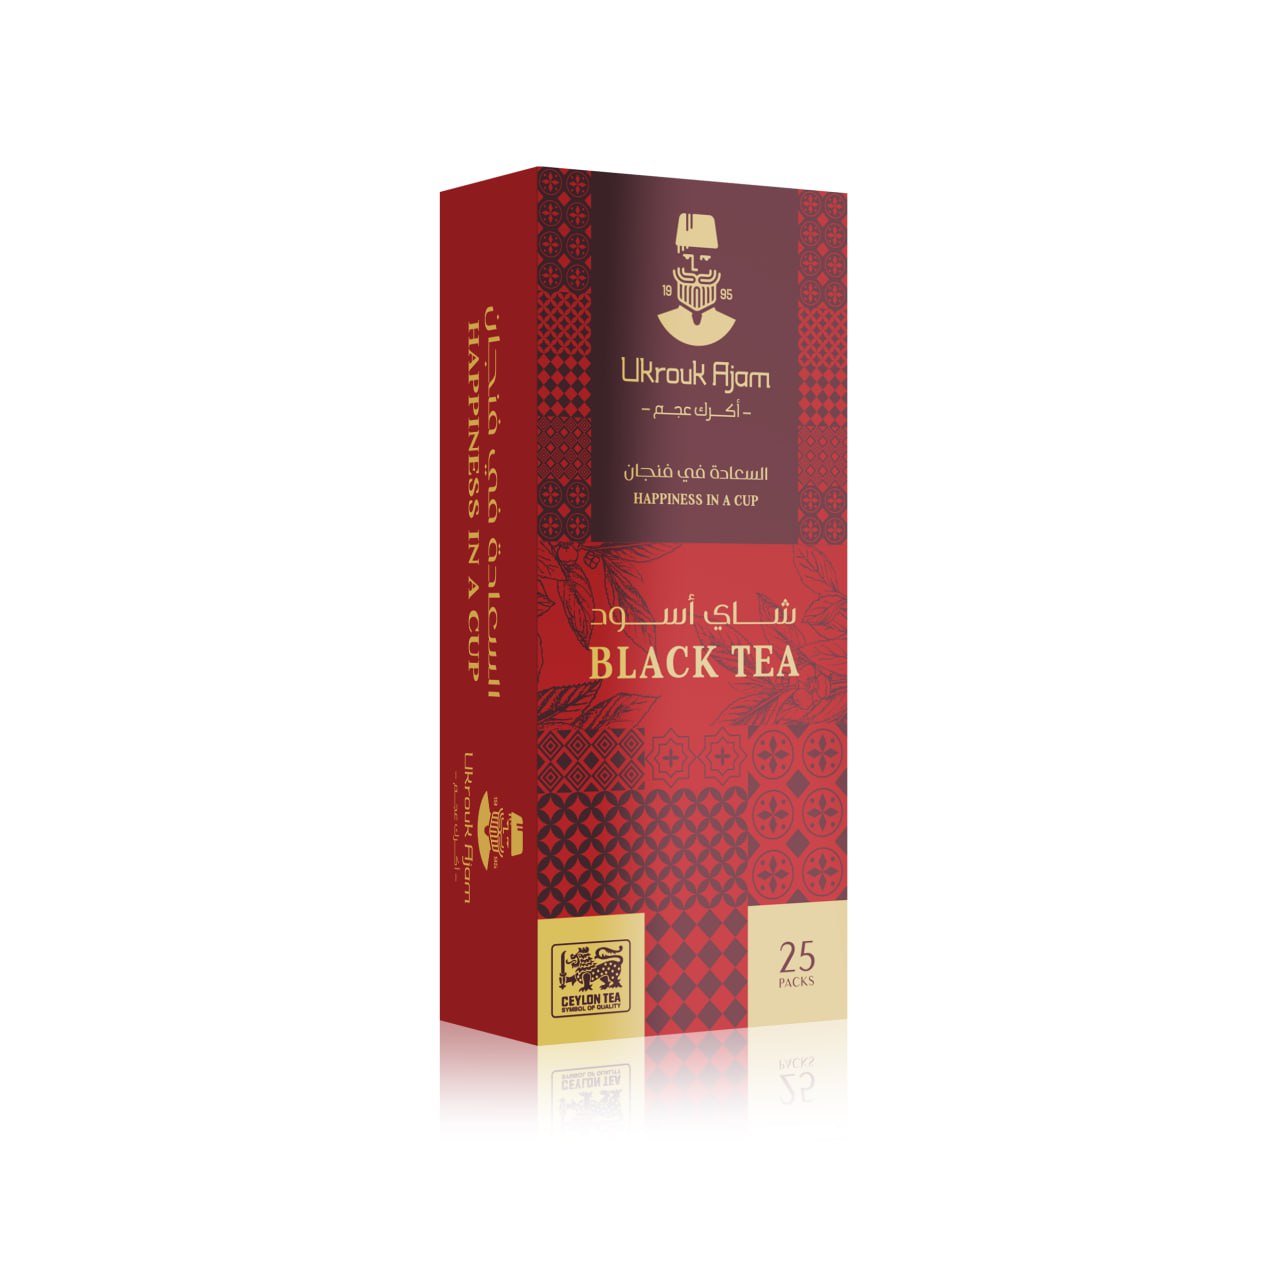 Ukrouk Ajam Black Tea in an elegant red box of 25 packs, detailed with traditional motifs and Arabic script, offering a premium Ceylon tea experience.